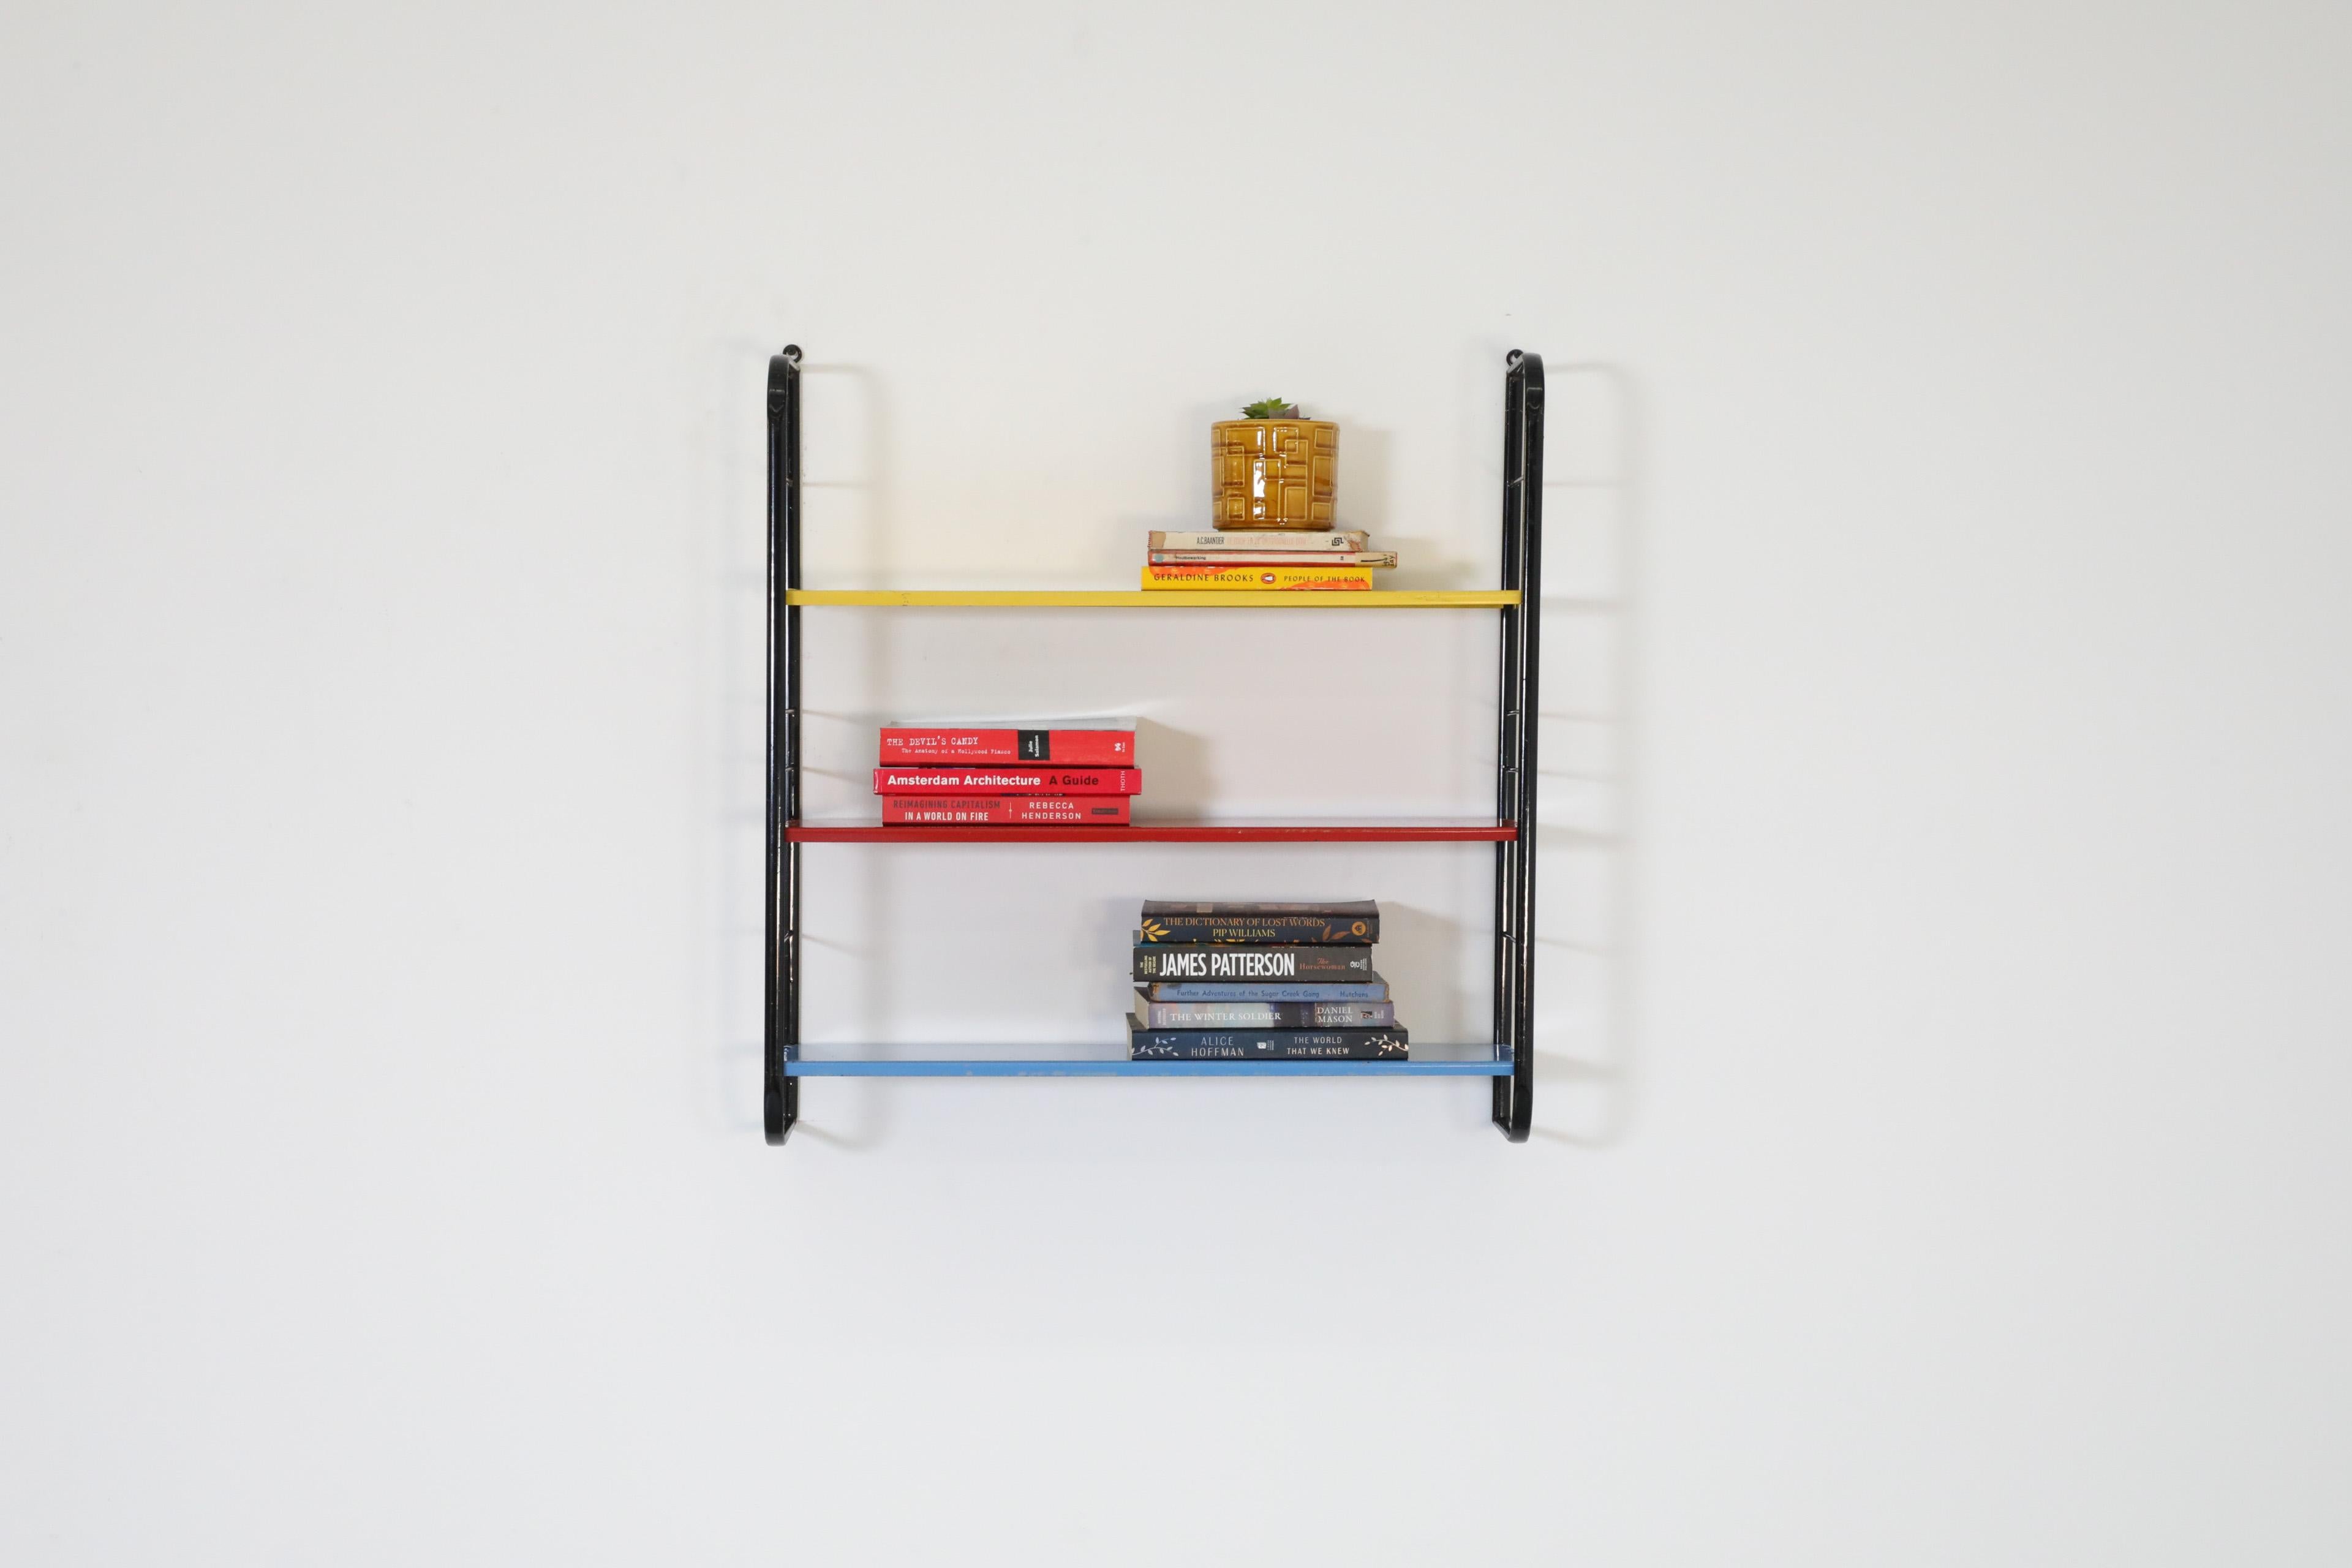 Amazing single section wall mounted shelving unit with adjustable metal enameled shelves on black wire risers. Yellow, red and blue interchangeable industrial style shelves for displaying books and accessories. In original condition with wear